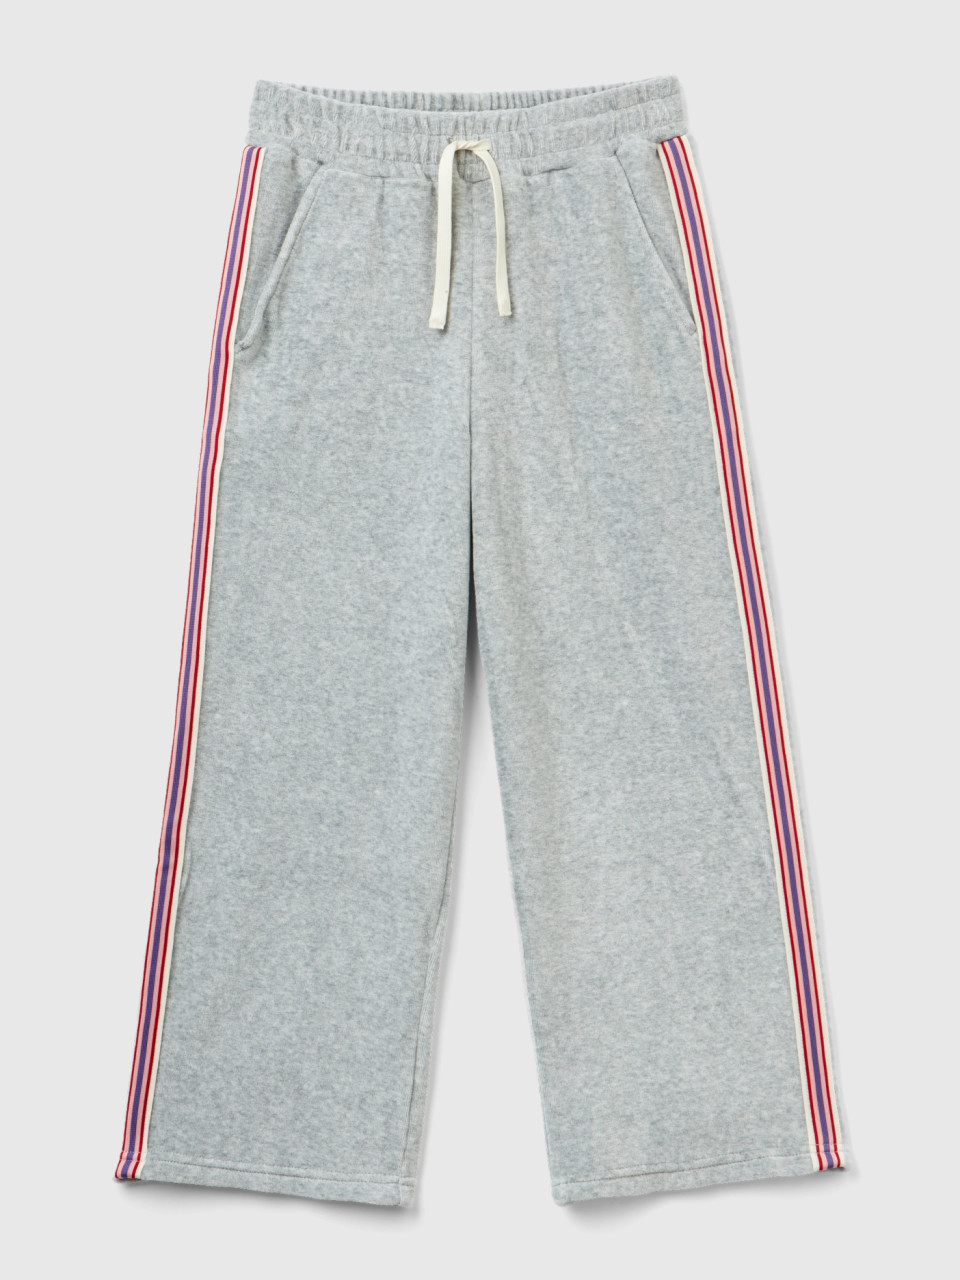 Benetton, Chenille Trousers With Striped Bands, Light Gray, Kids